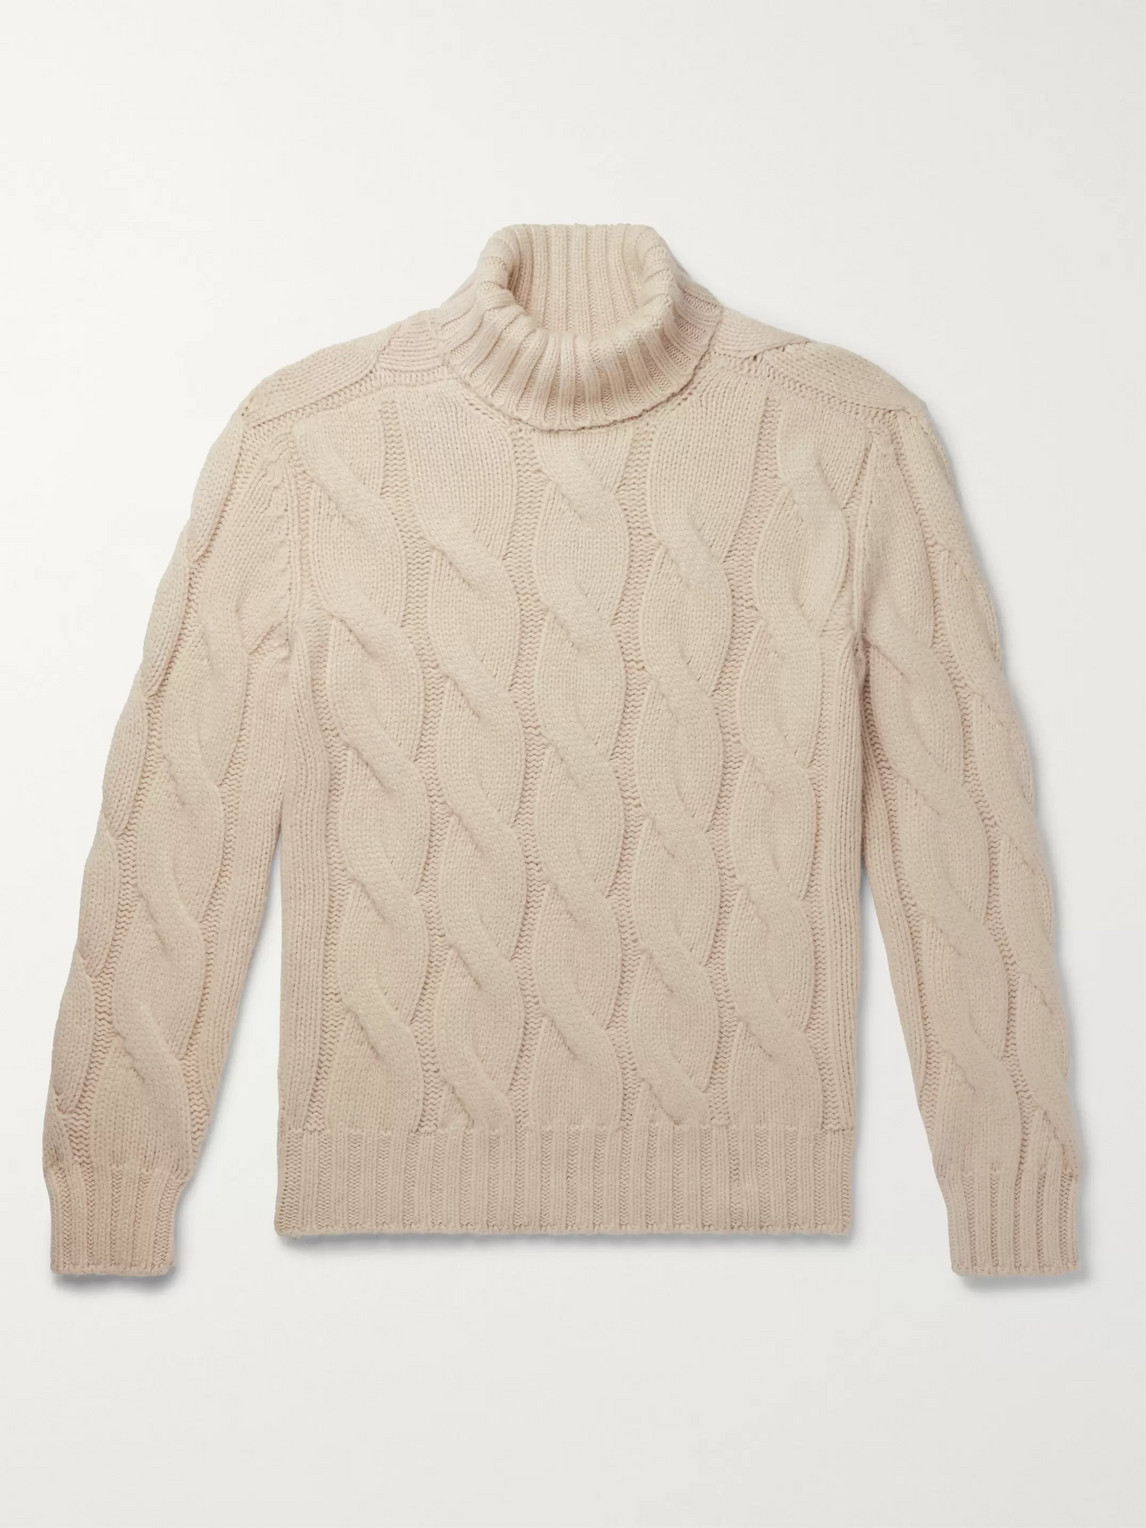 BRUNELLO CUCINELLI OVERSIZED CABLE-KNIT CASHMERE ROLLNECK SWEATER